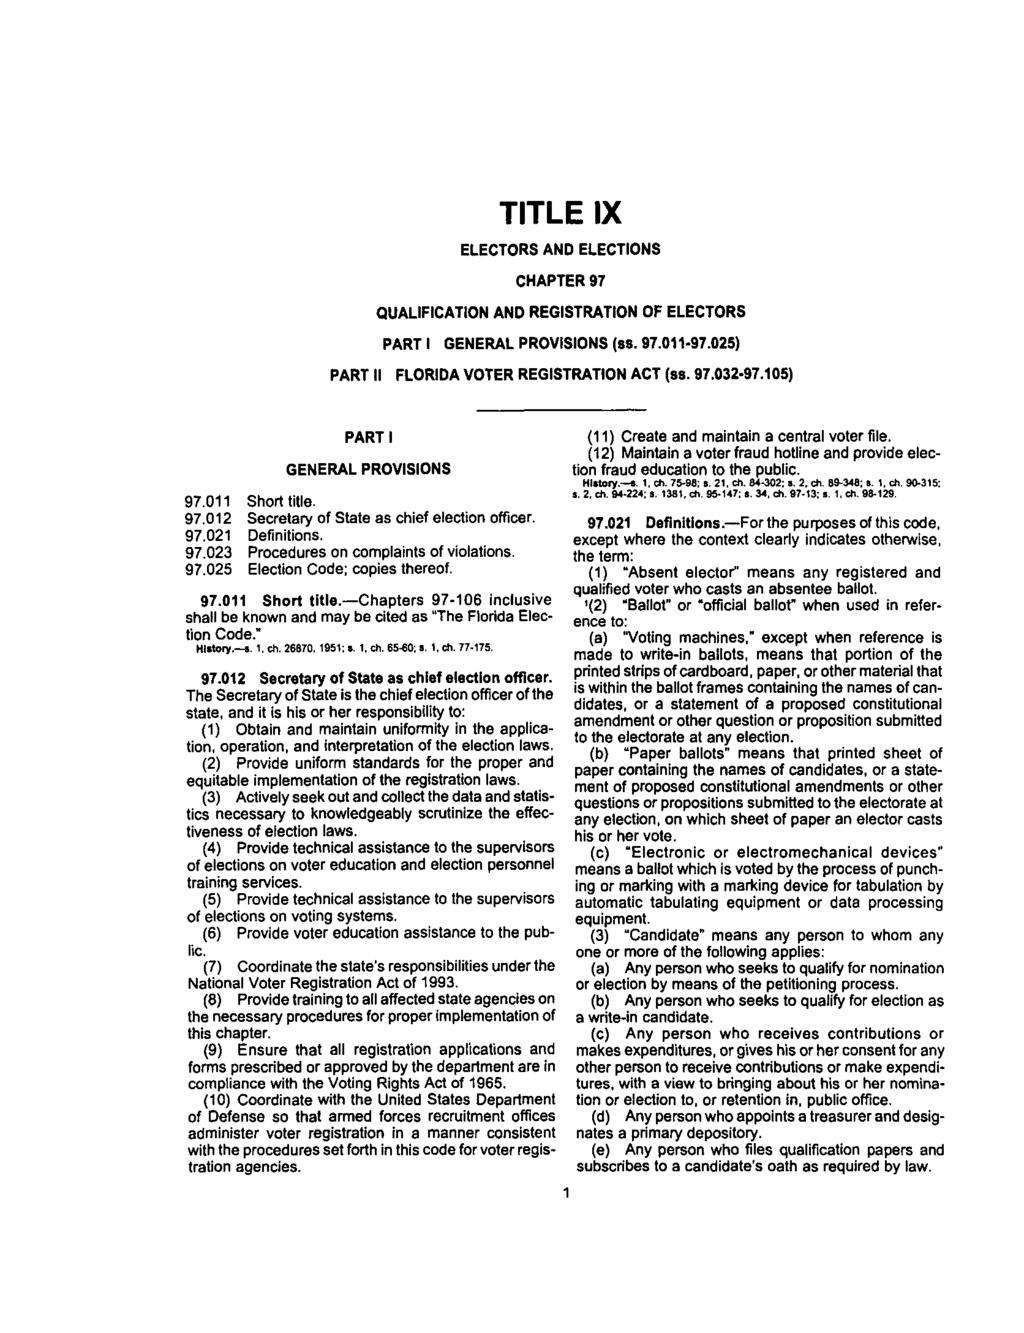 TITLE IX ELECTORS AND ELECTIONS CHAPTER 97 QUALIFICATION AND REGISTRATION OF ELECTORS PART I GENERAL PROVISIONS (ss. 97.011-97.025) PART II FLORIDA VOTER REGISTRATION ACT (ss. 97.032-97.